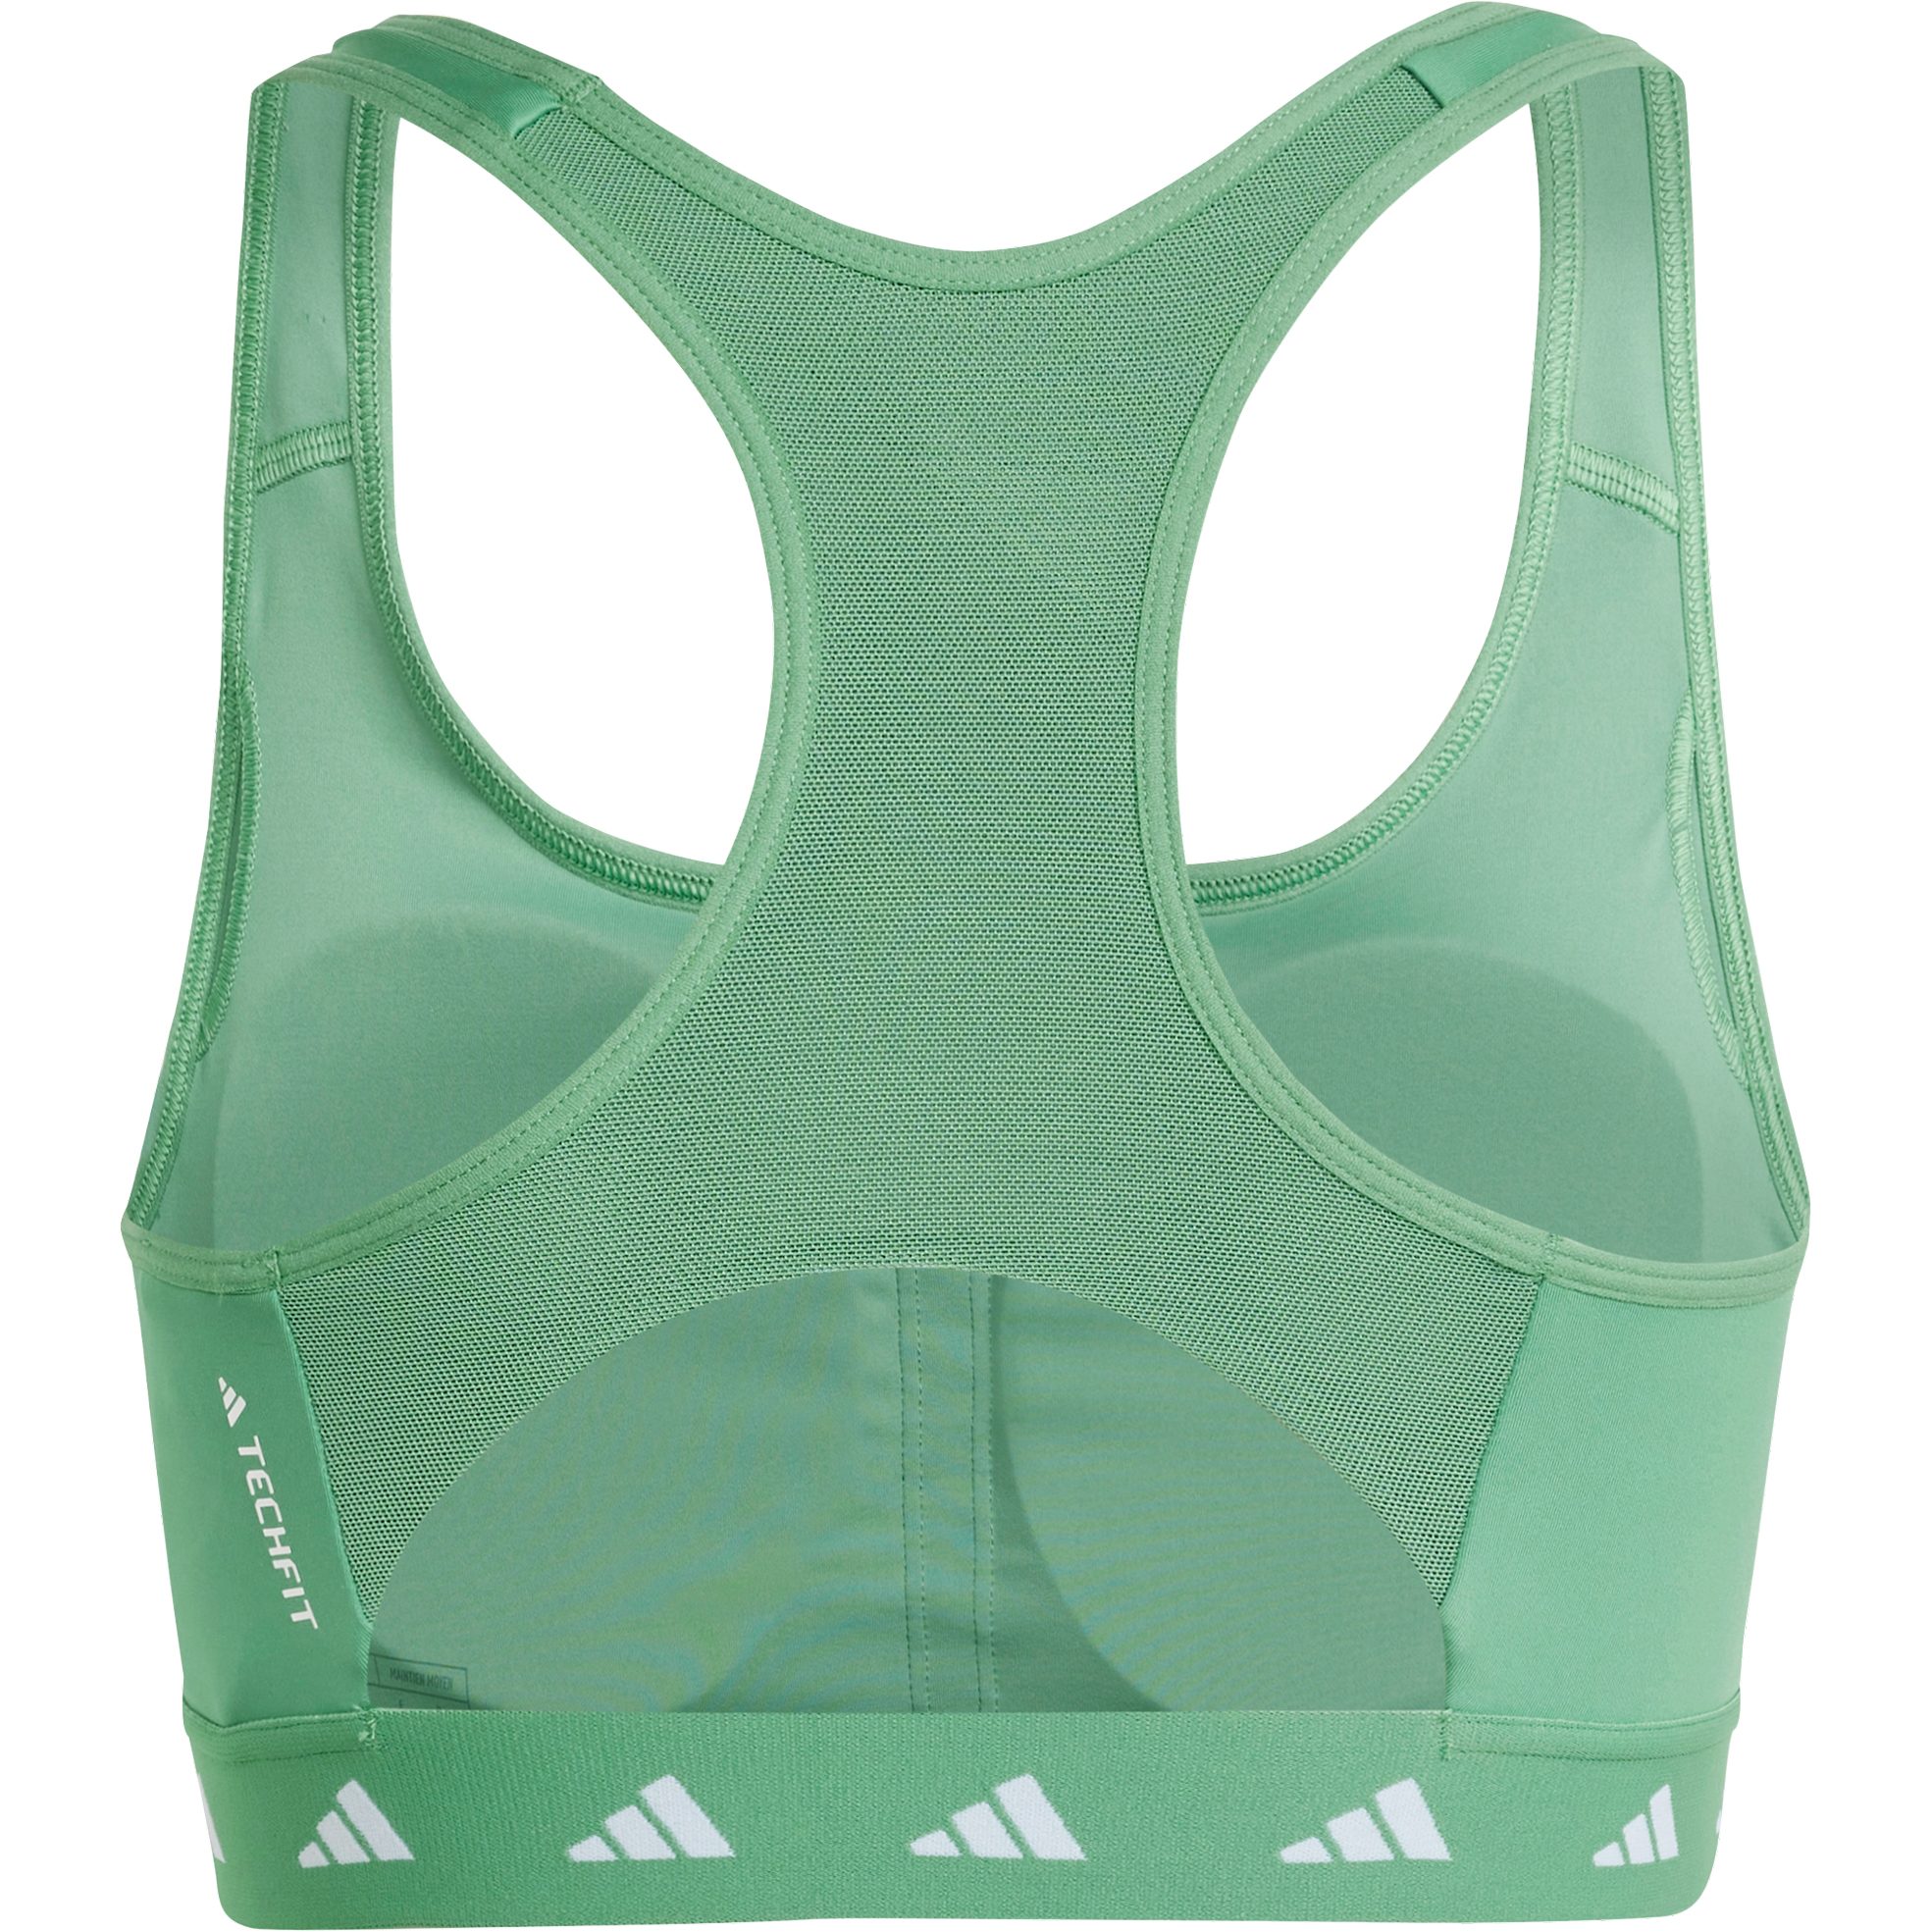 Adidas Techfit Medium Compression Climacool Athletic Sports Bra Green - $10  - From Autumn